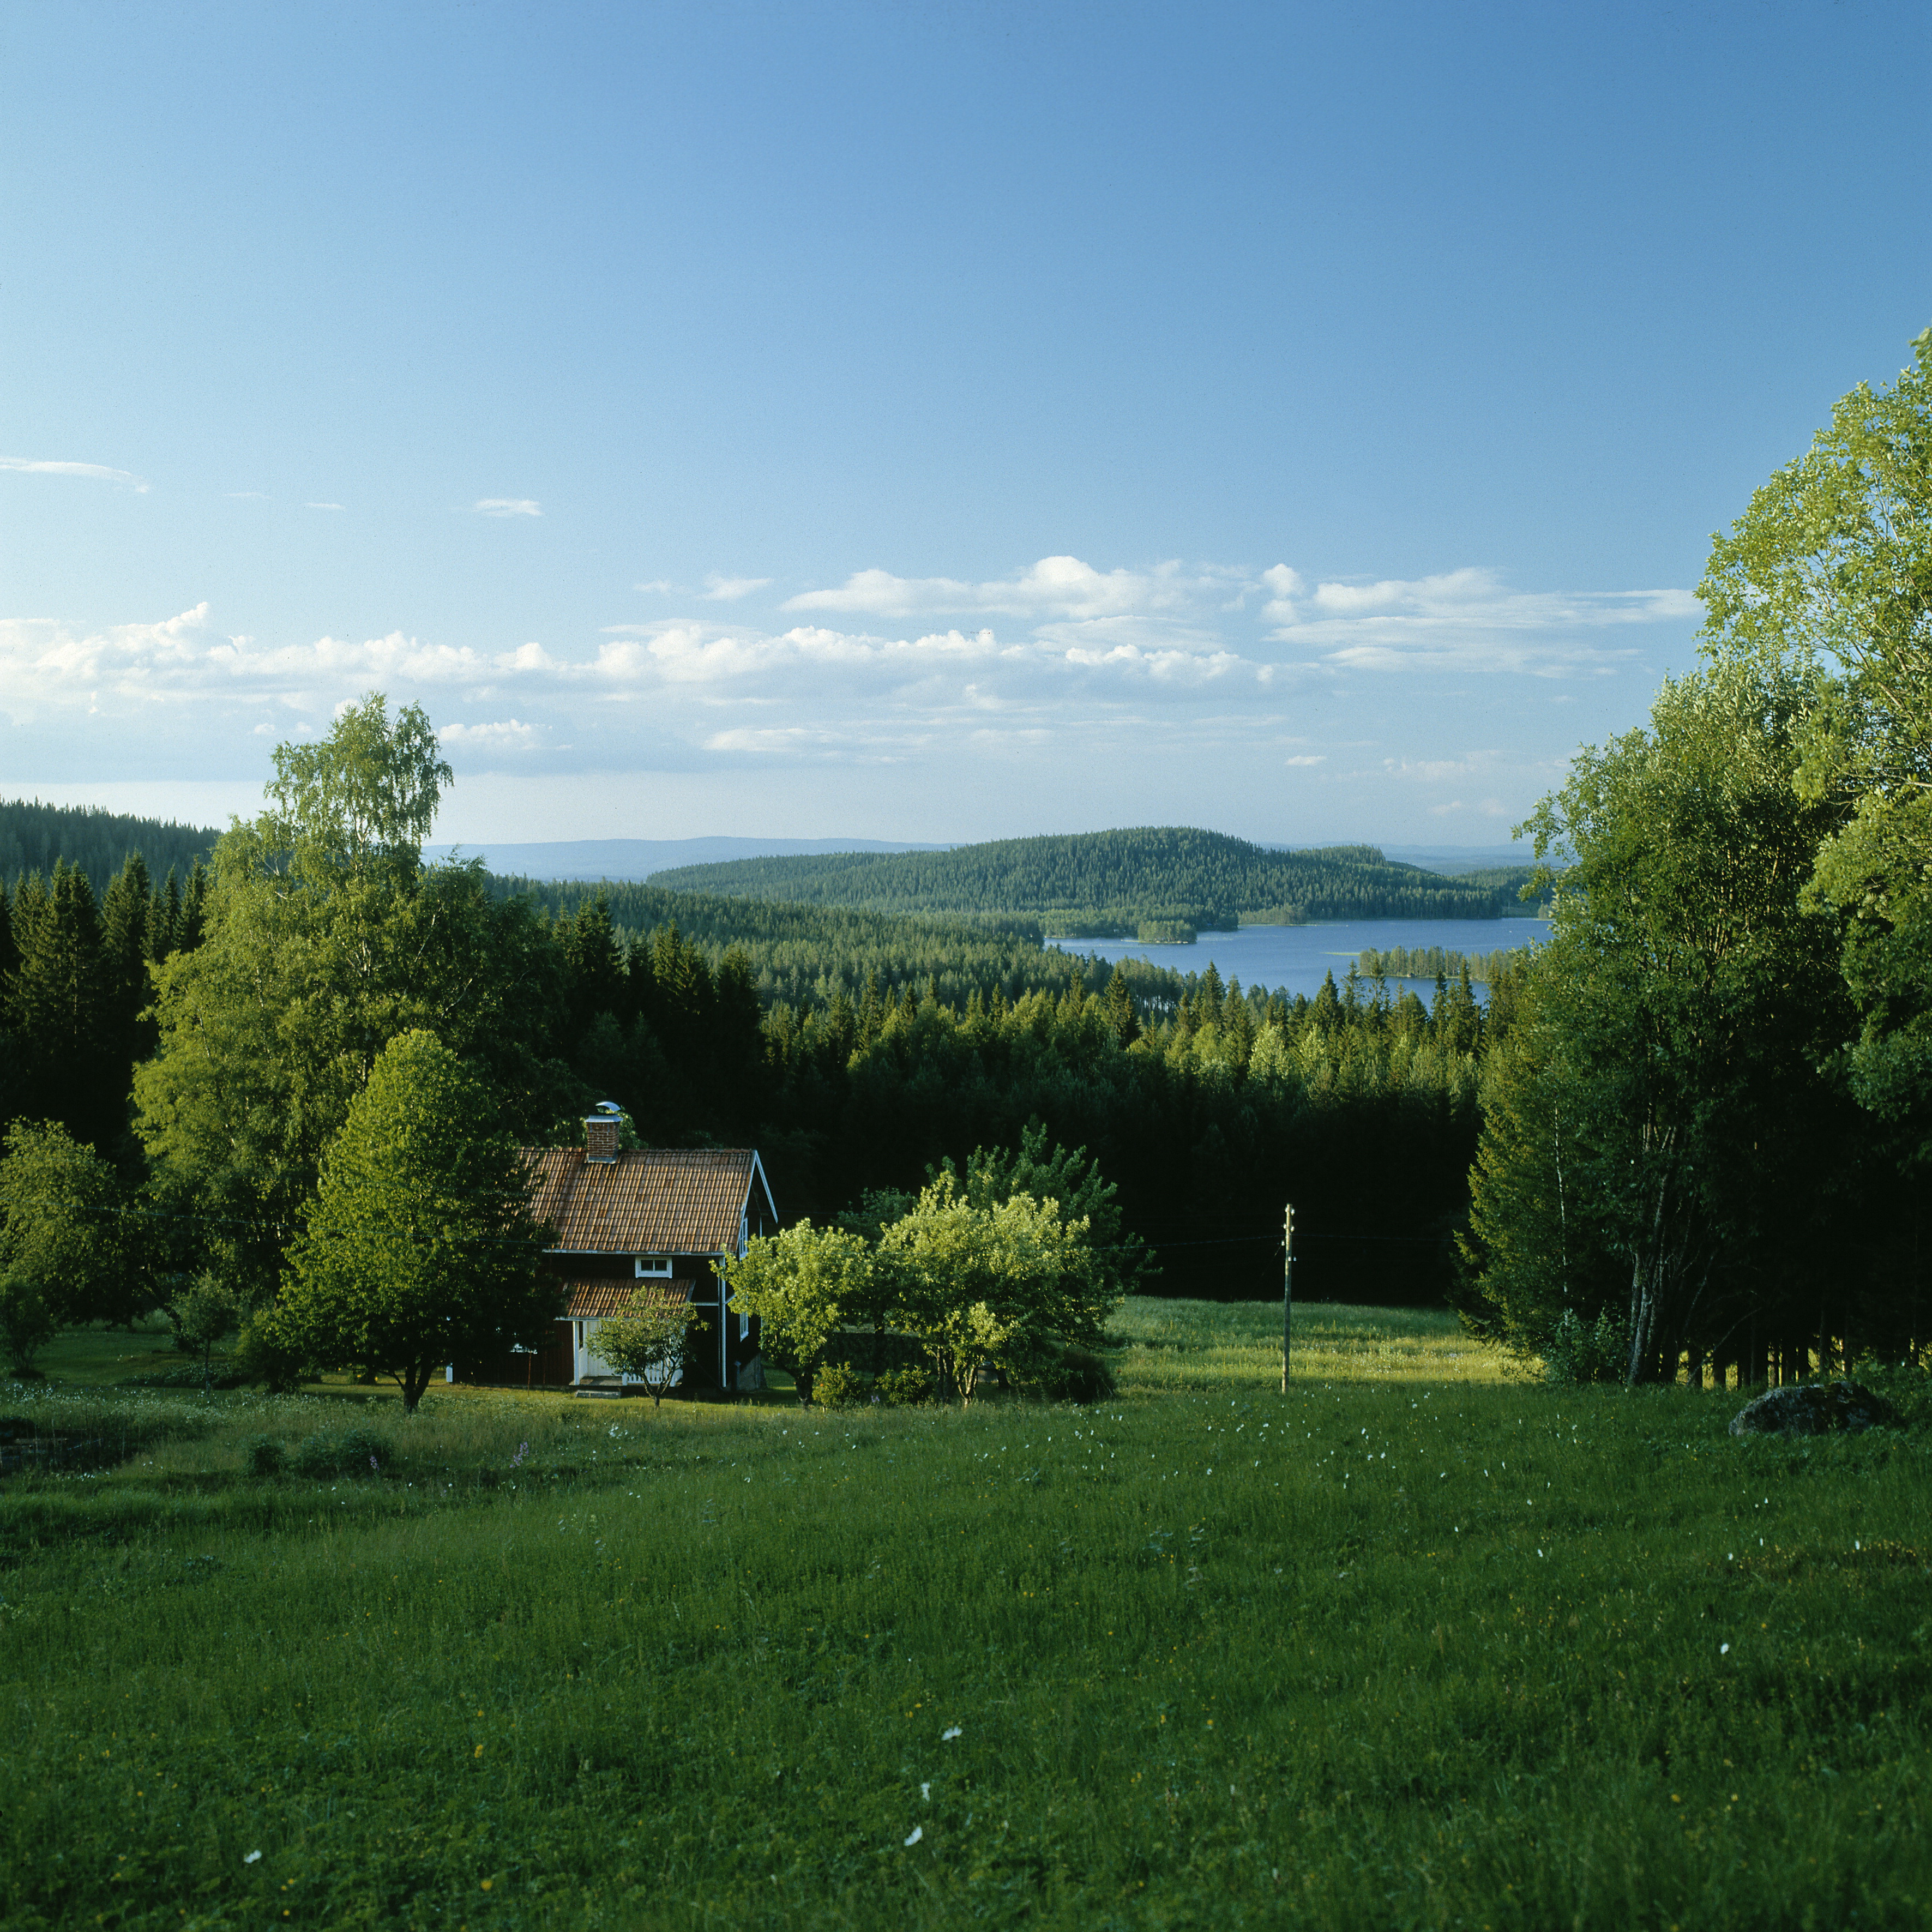 England's green and pleasant lands chalets and lakes